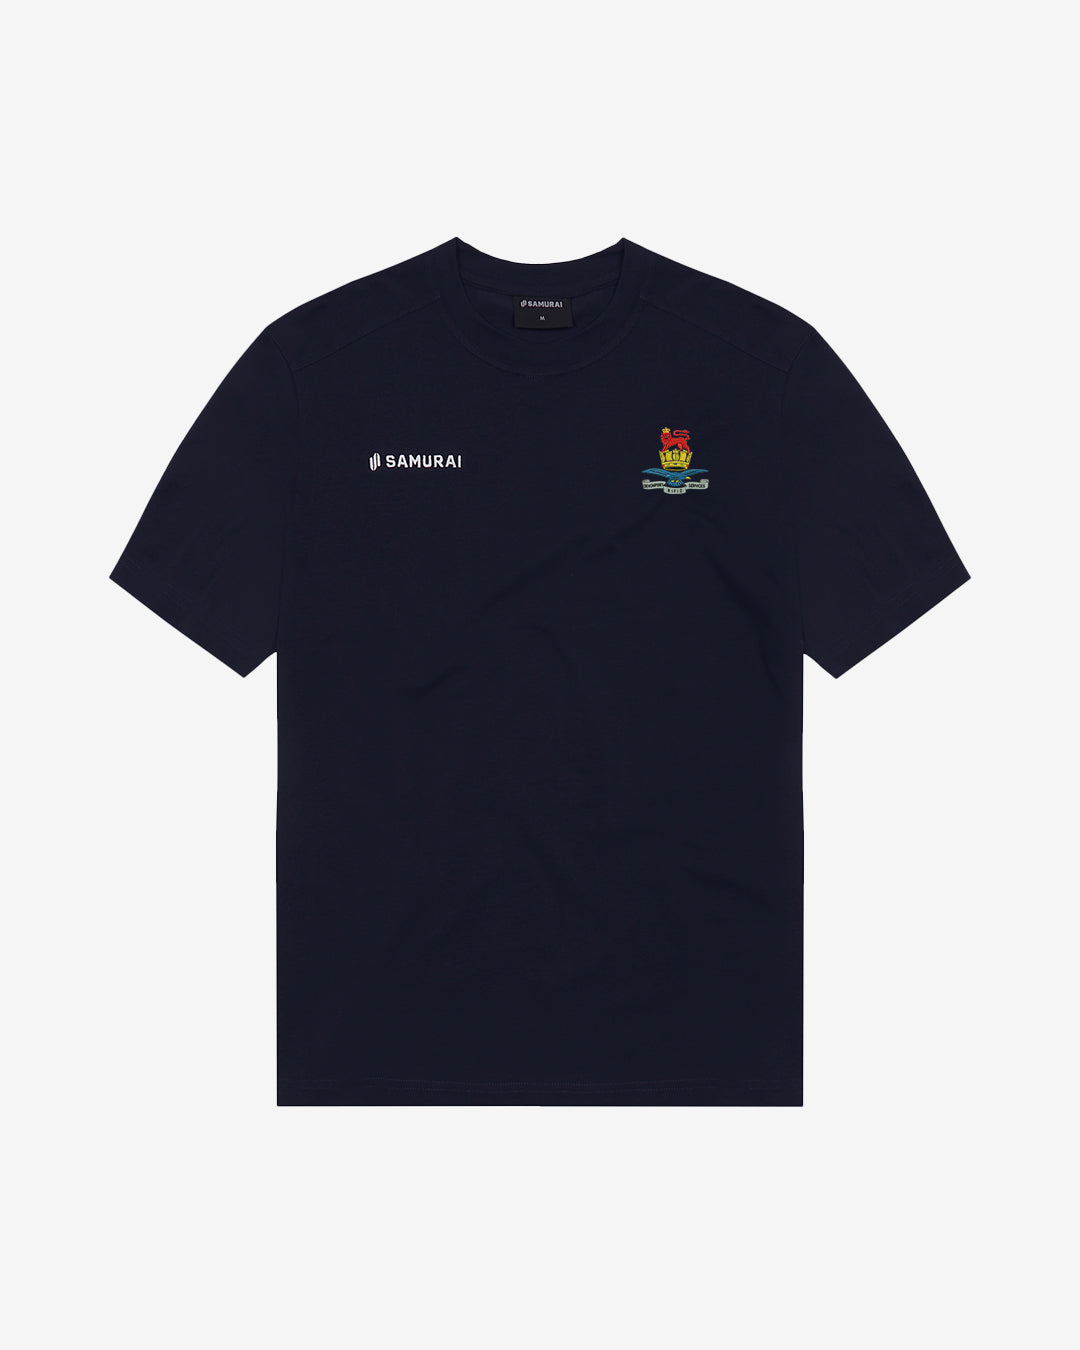 Devonport Services - EP:0110 - Cotton Touch Tee - Navy